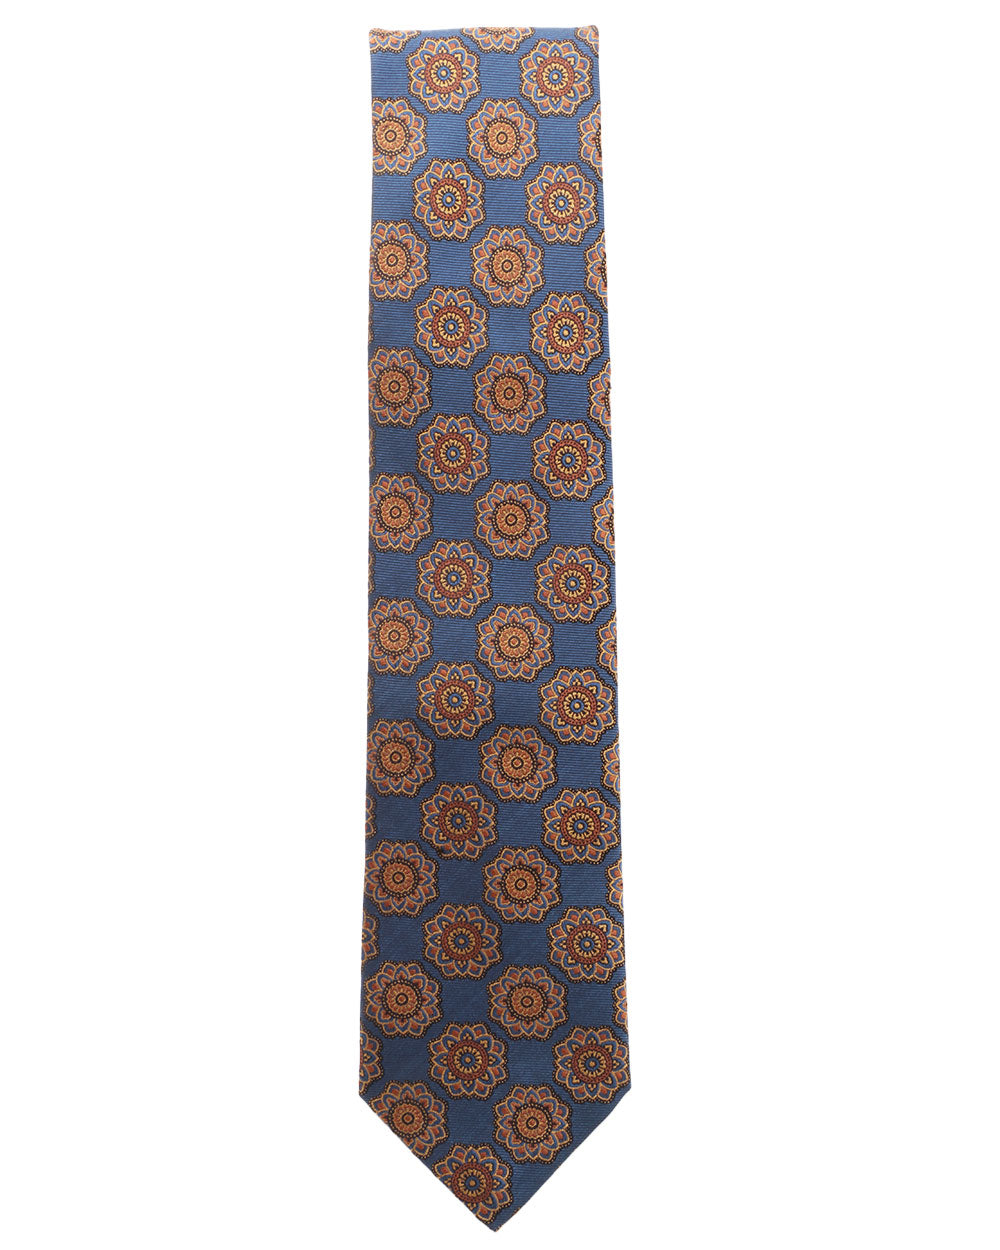 Navy with Gold and Brown Exploded Medallion Silk Tie